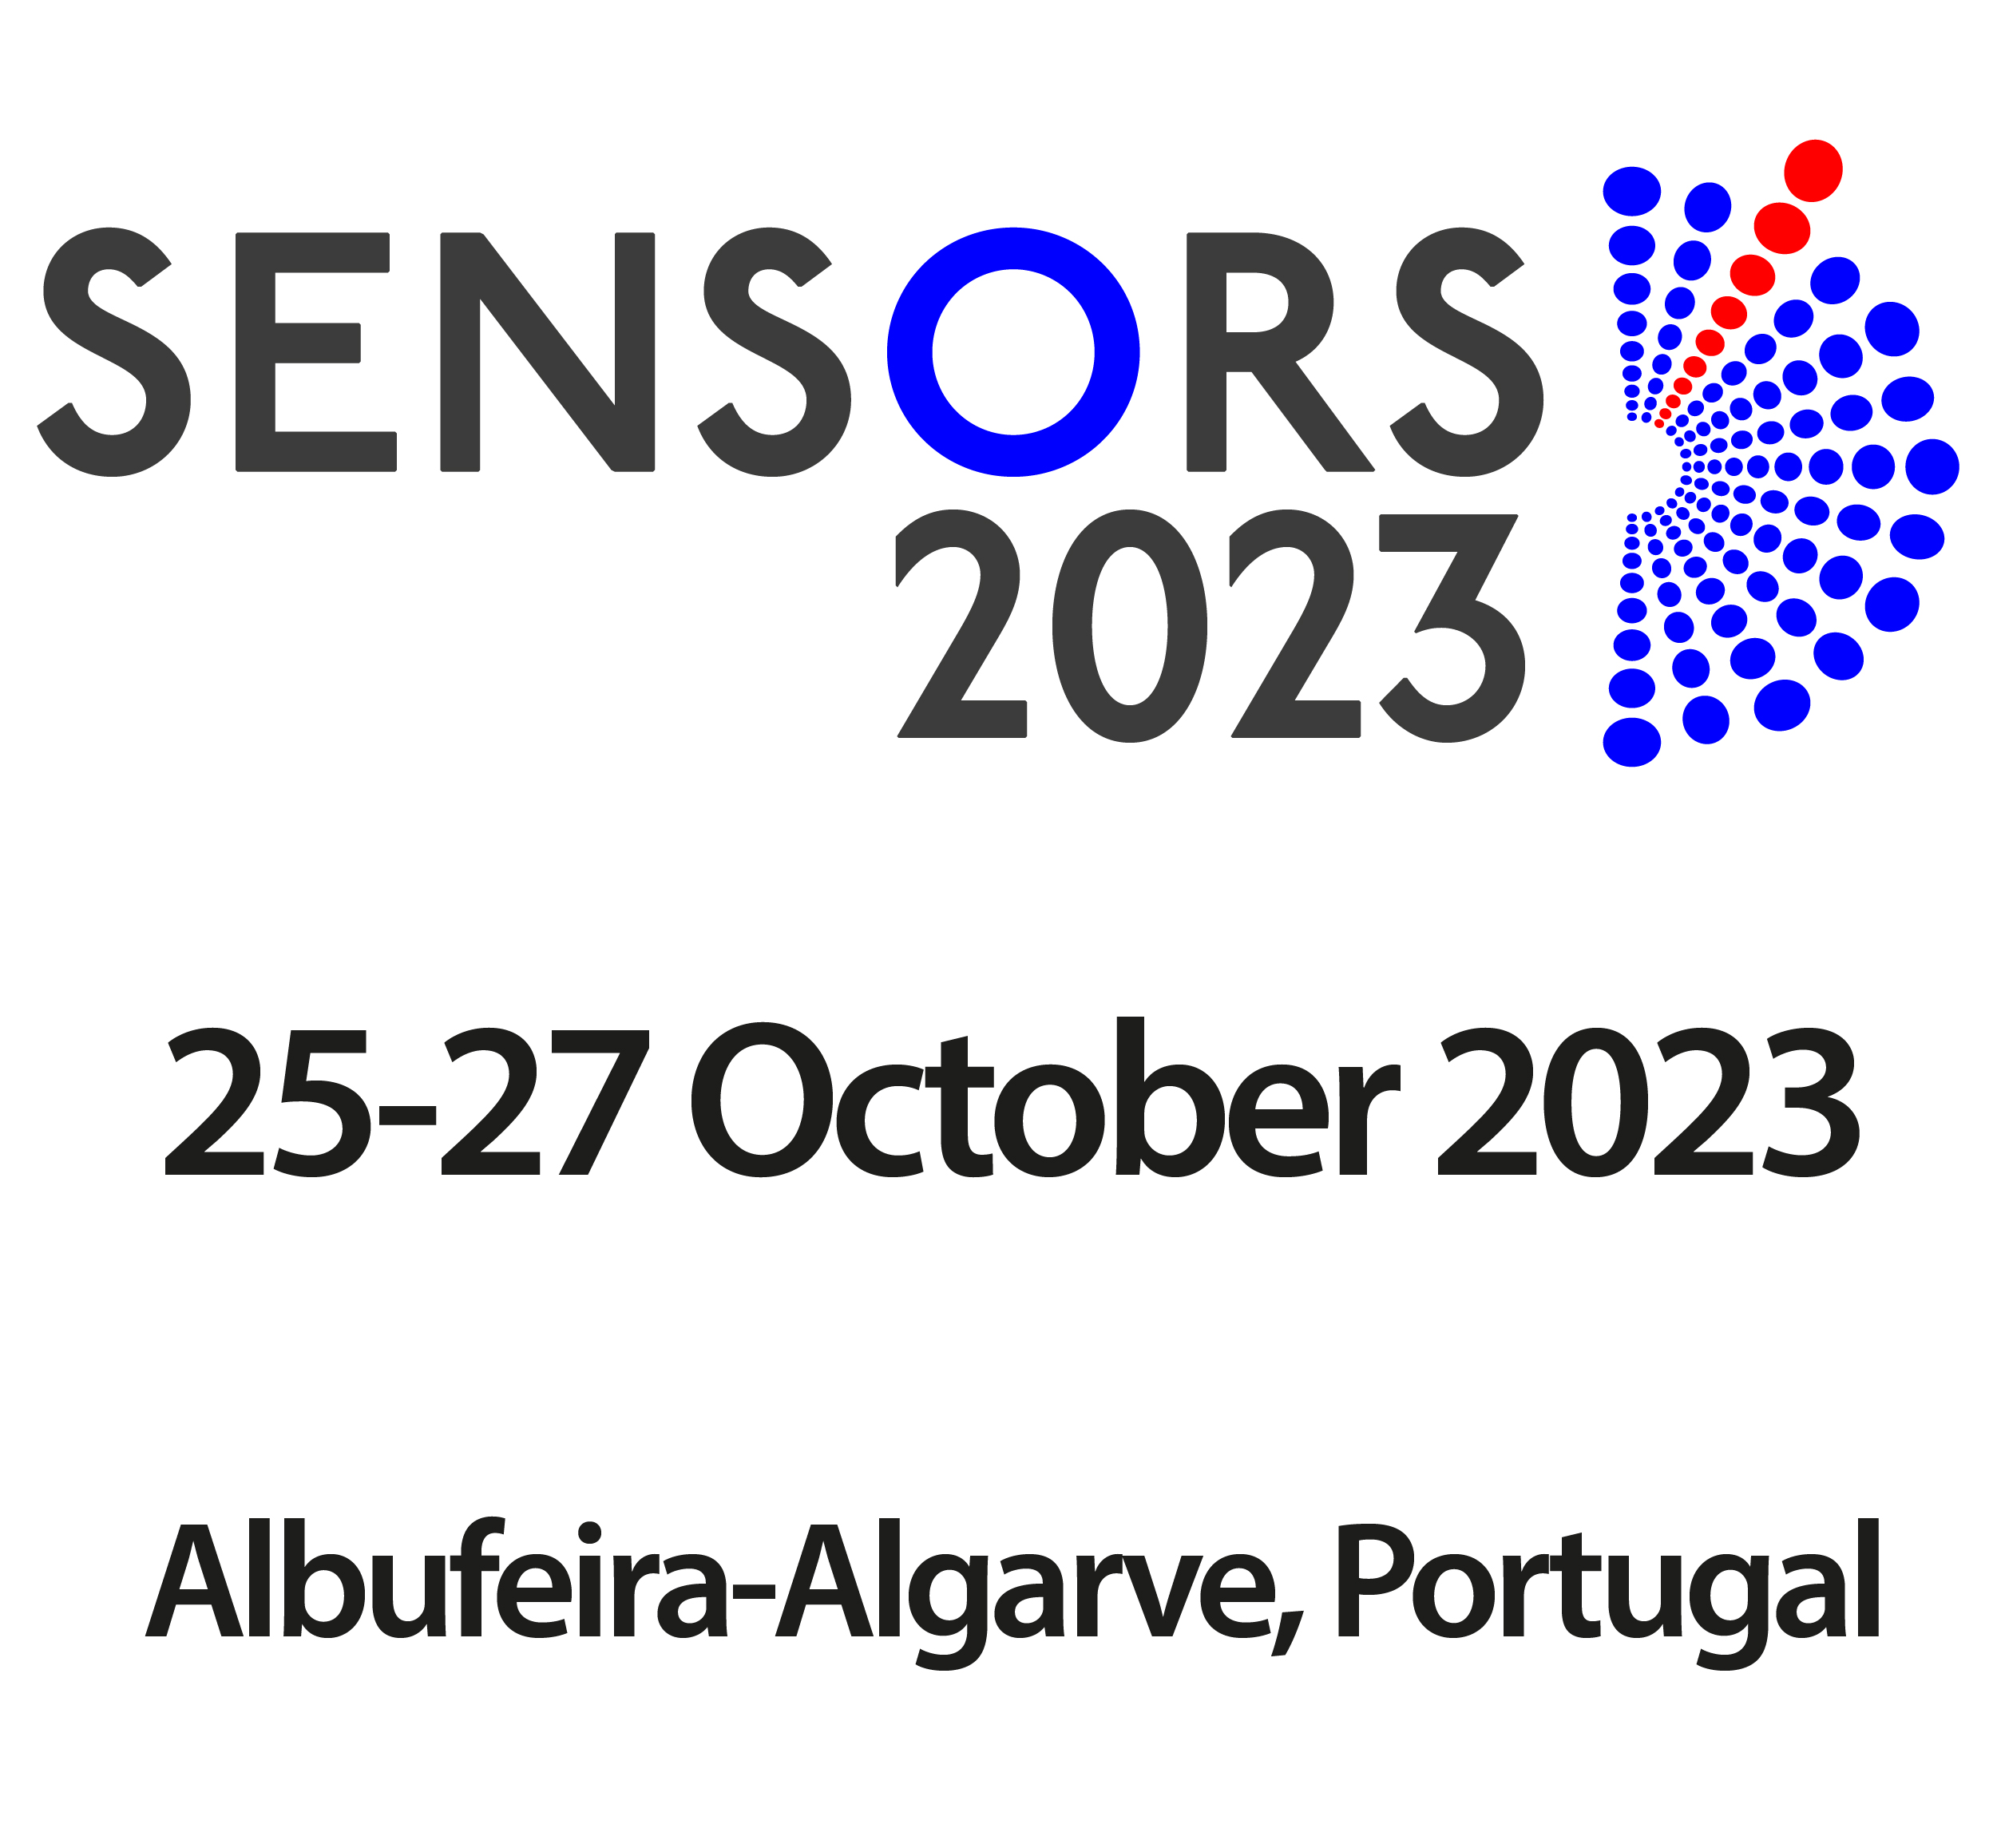 The 3rd edition of the Sensors Technologies International conference - Sensors 2023